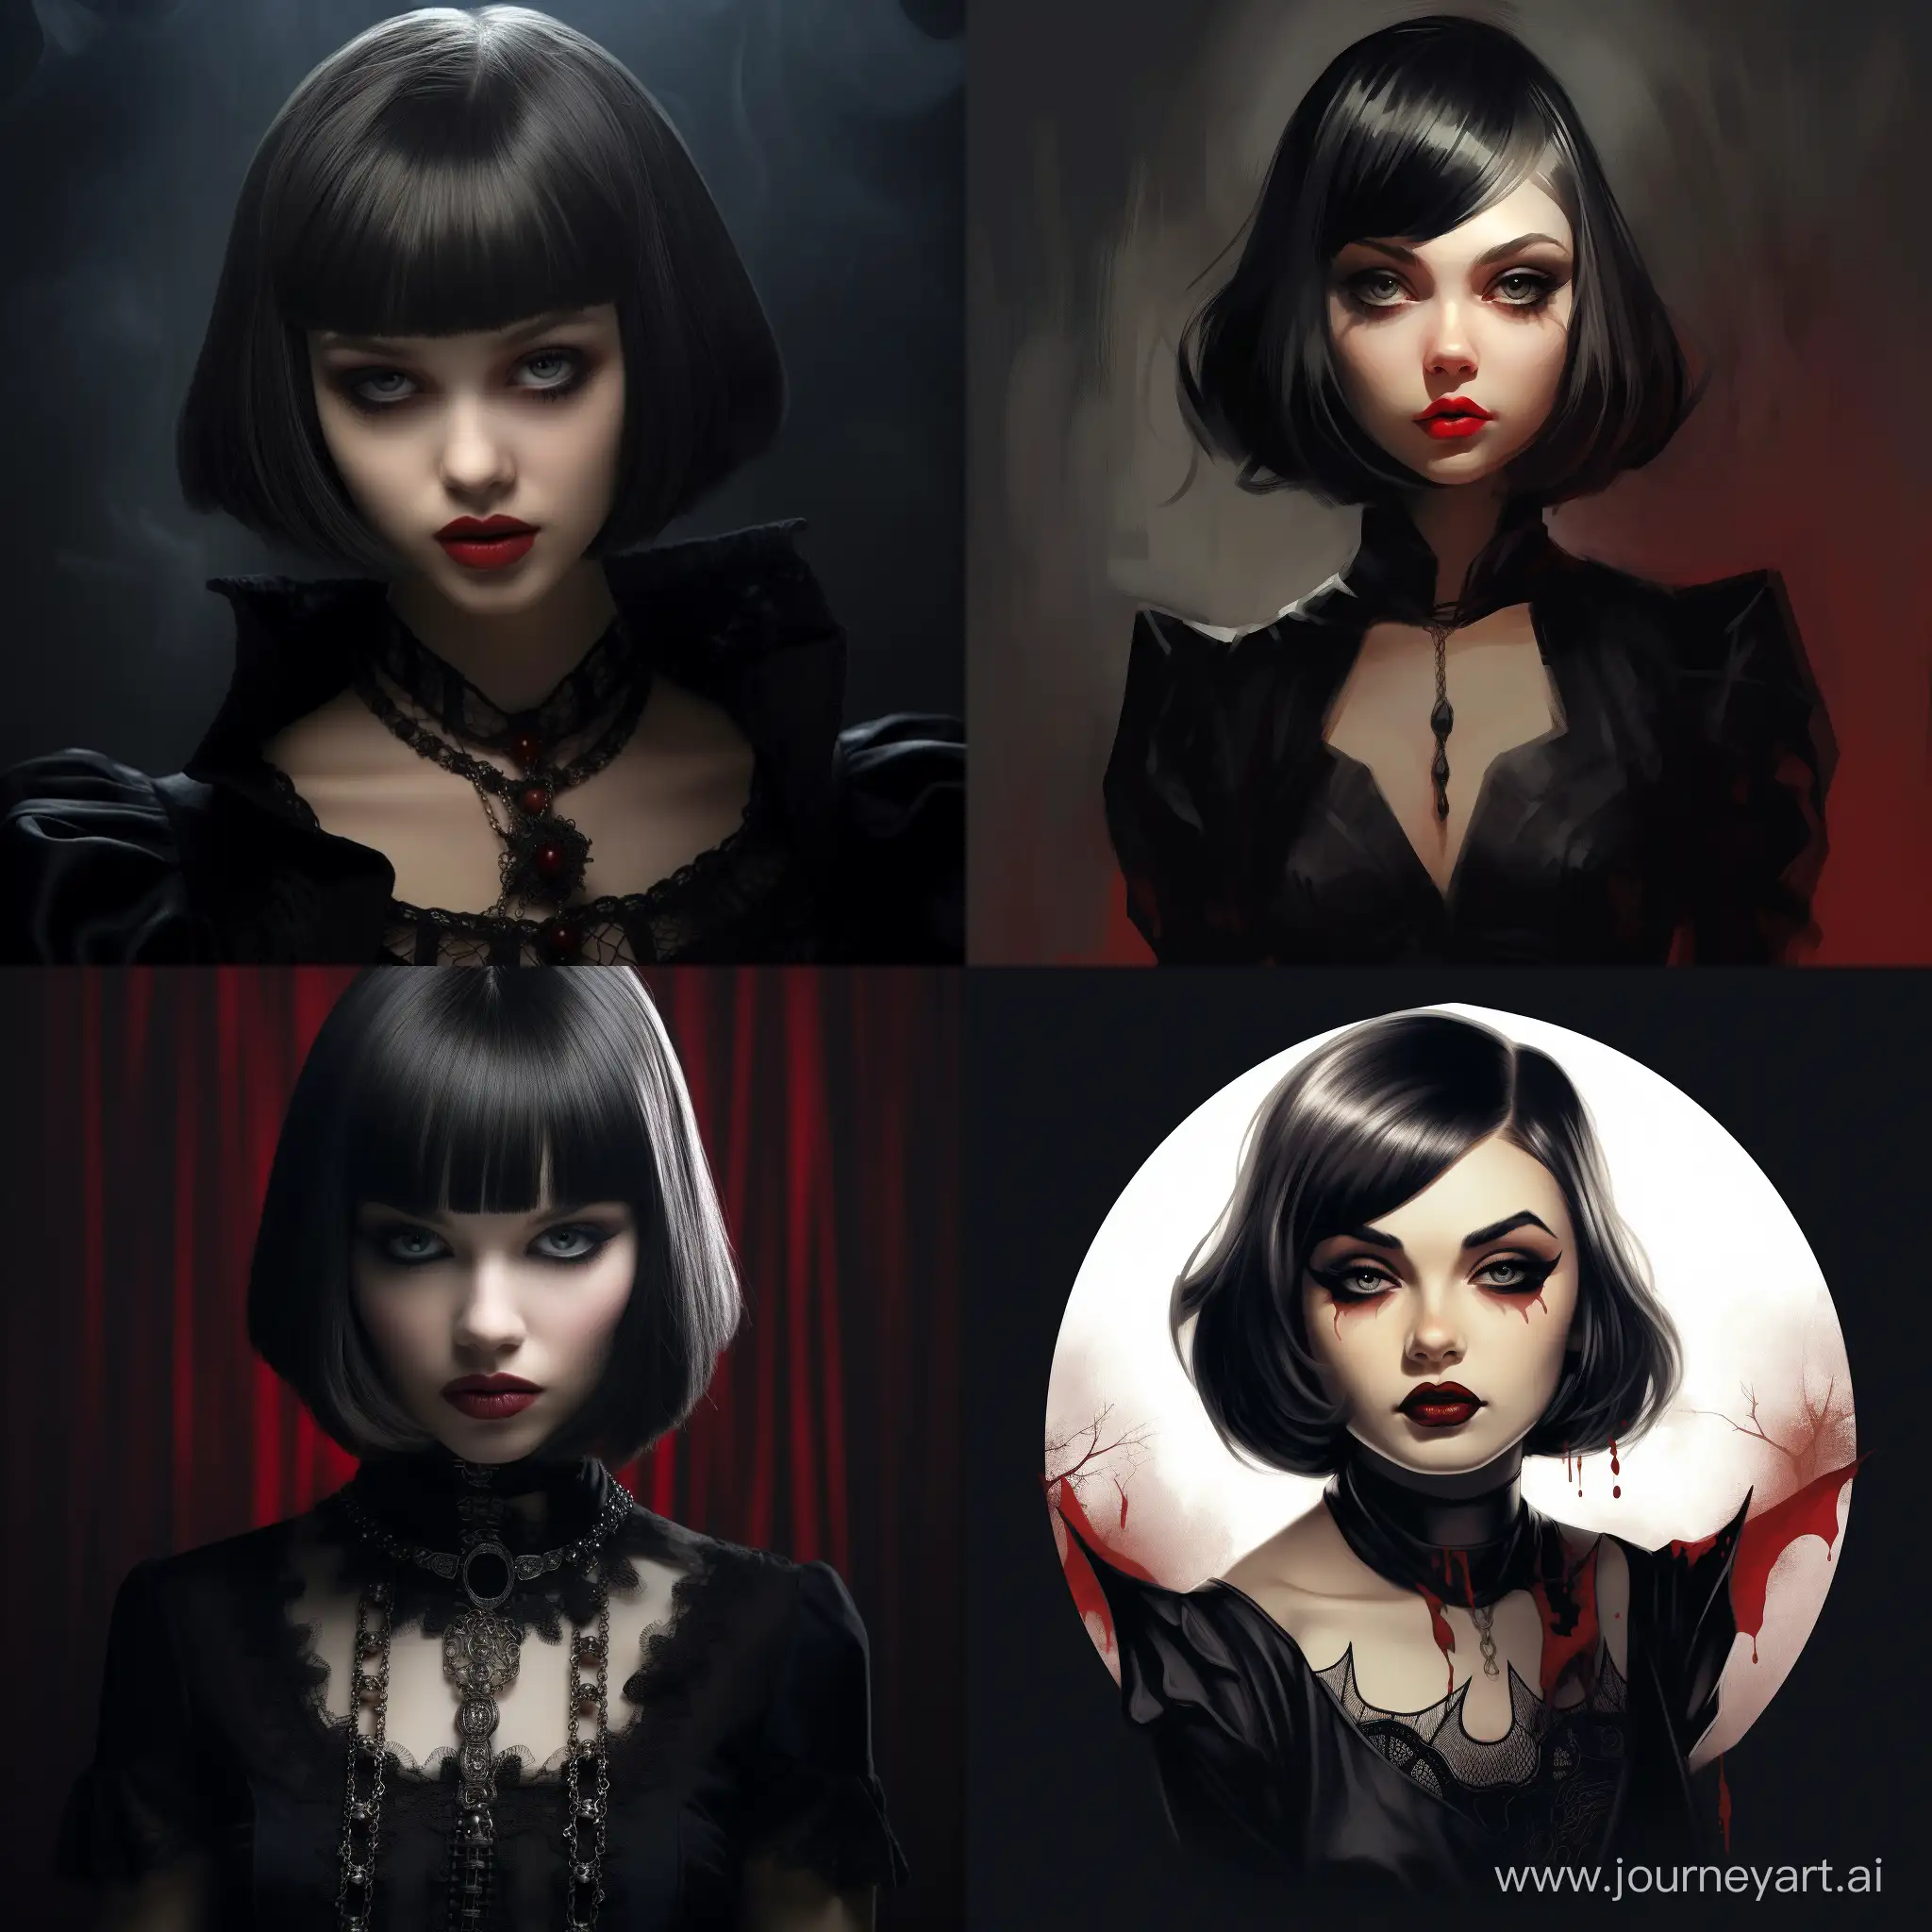 Chic-Vampire-Girl-with-Bob-Haircut-in-Stockings